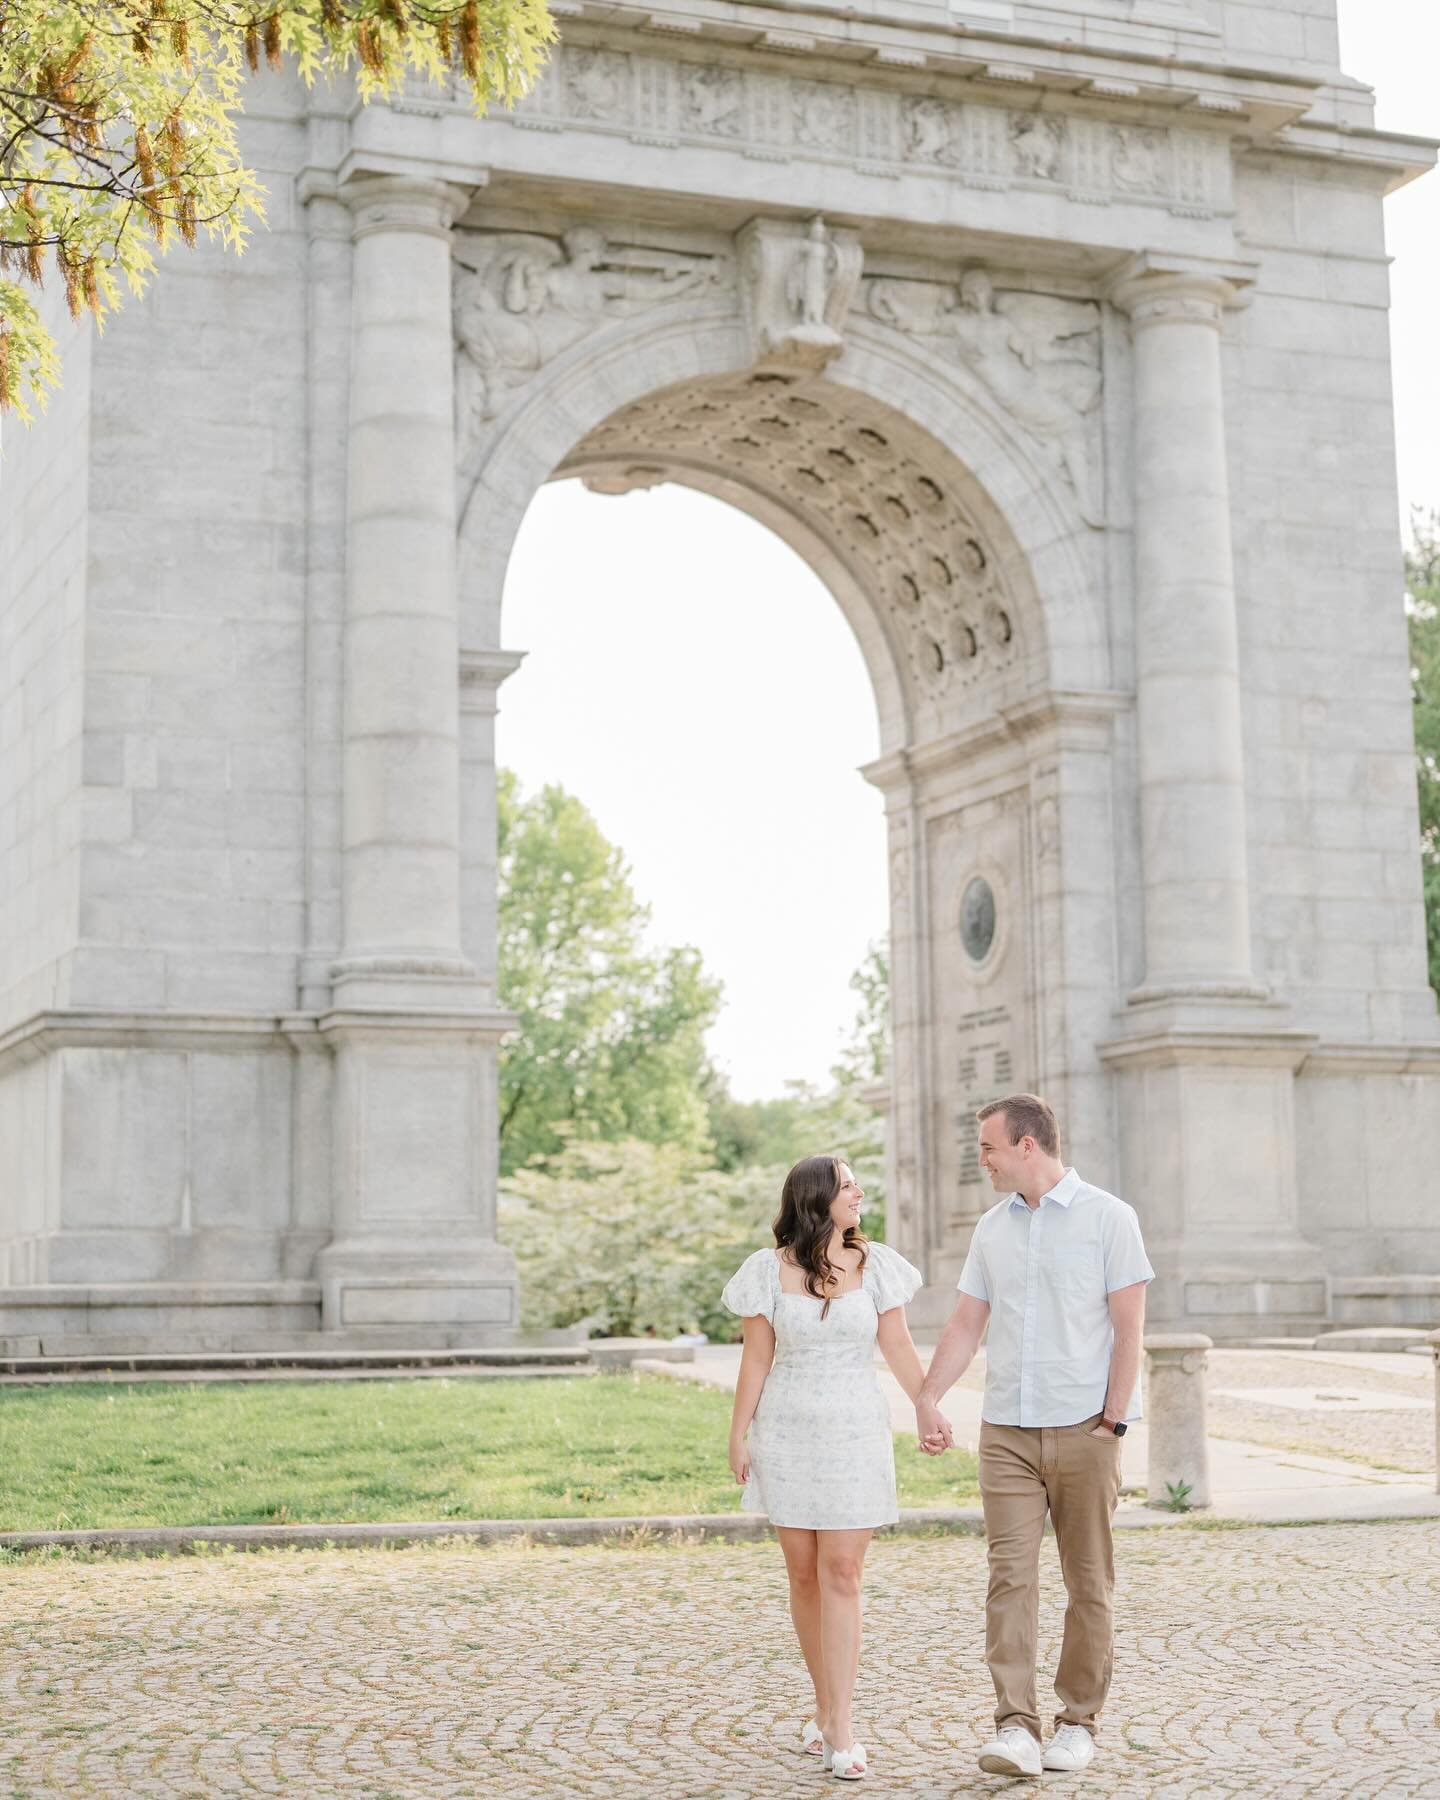 Brett &amp; Carly got the most perfect golden hour for their engagement session this week. Can&rsquo;t wait for their 2025 wedding!